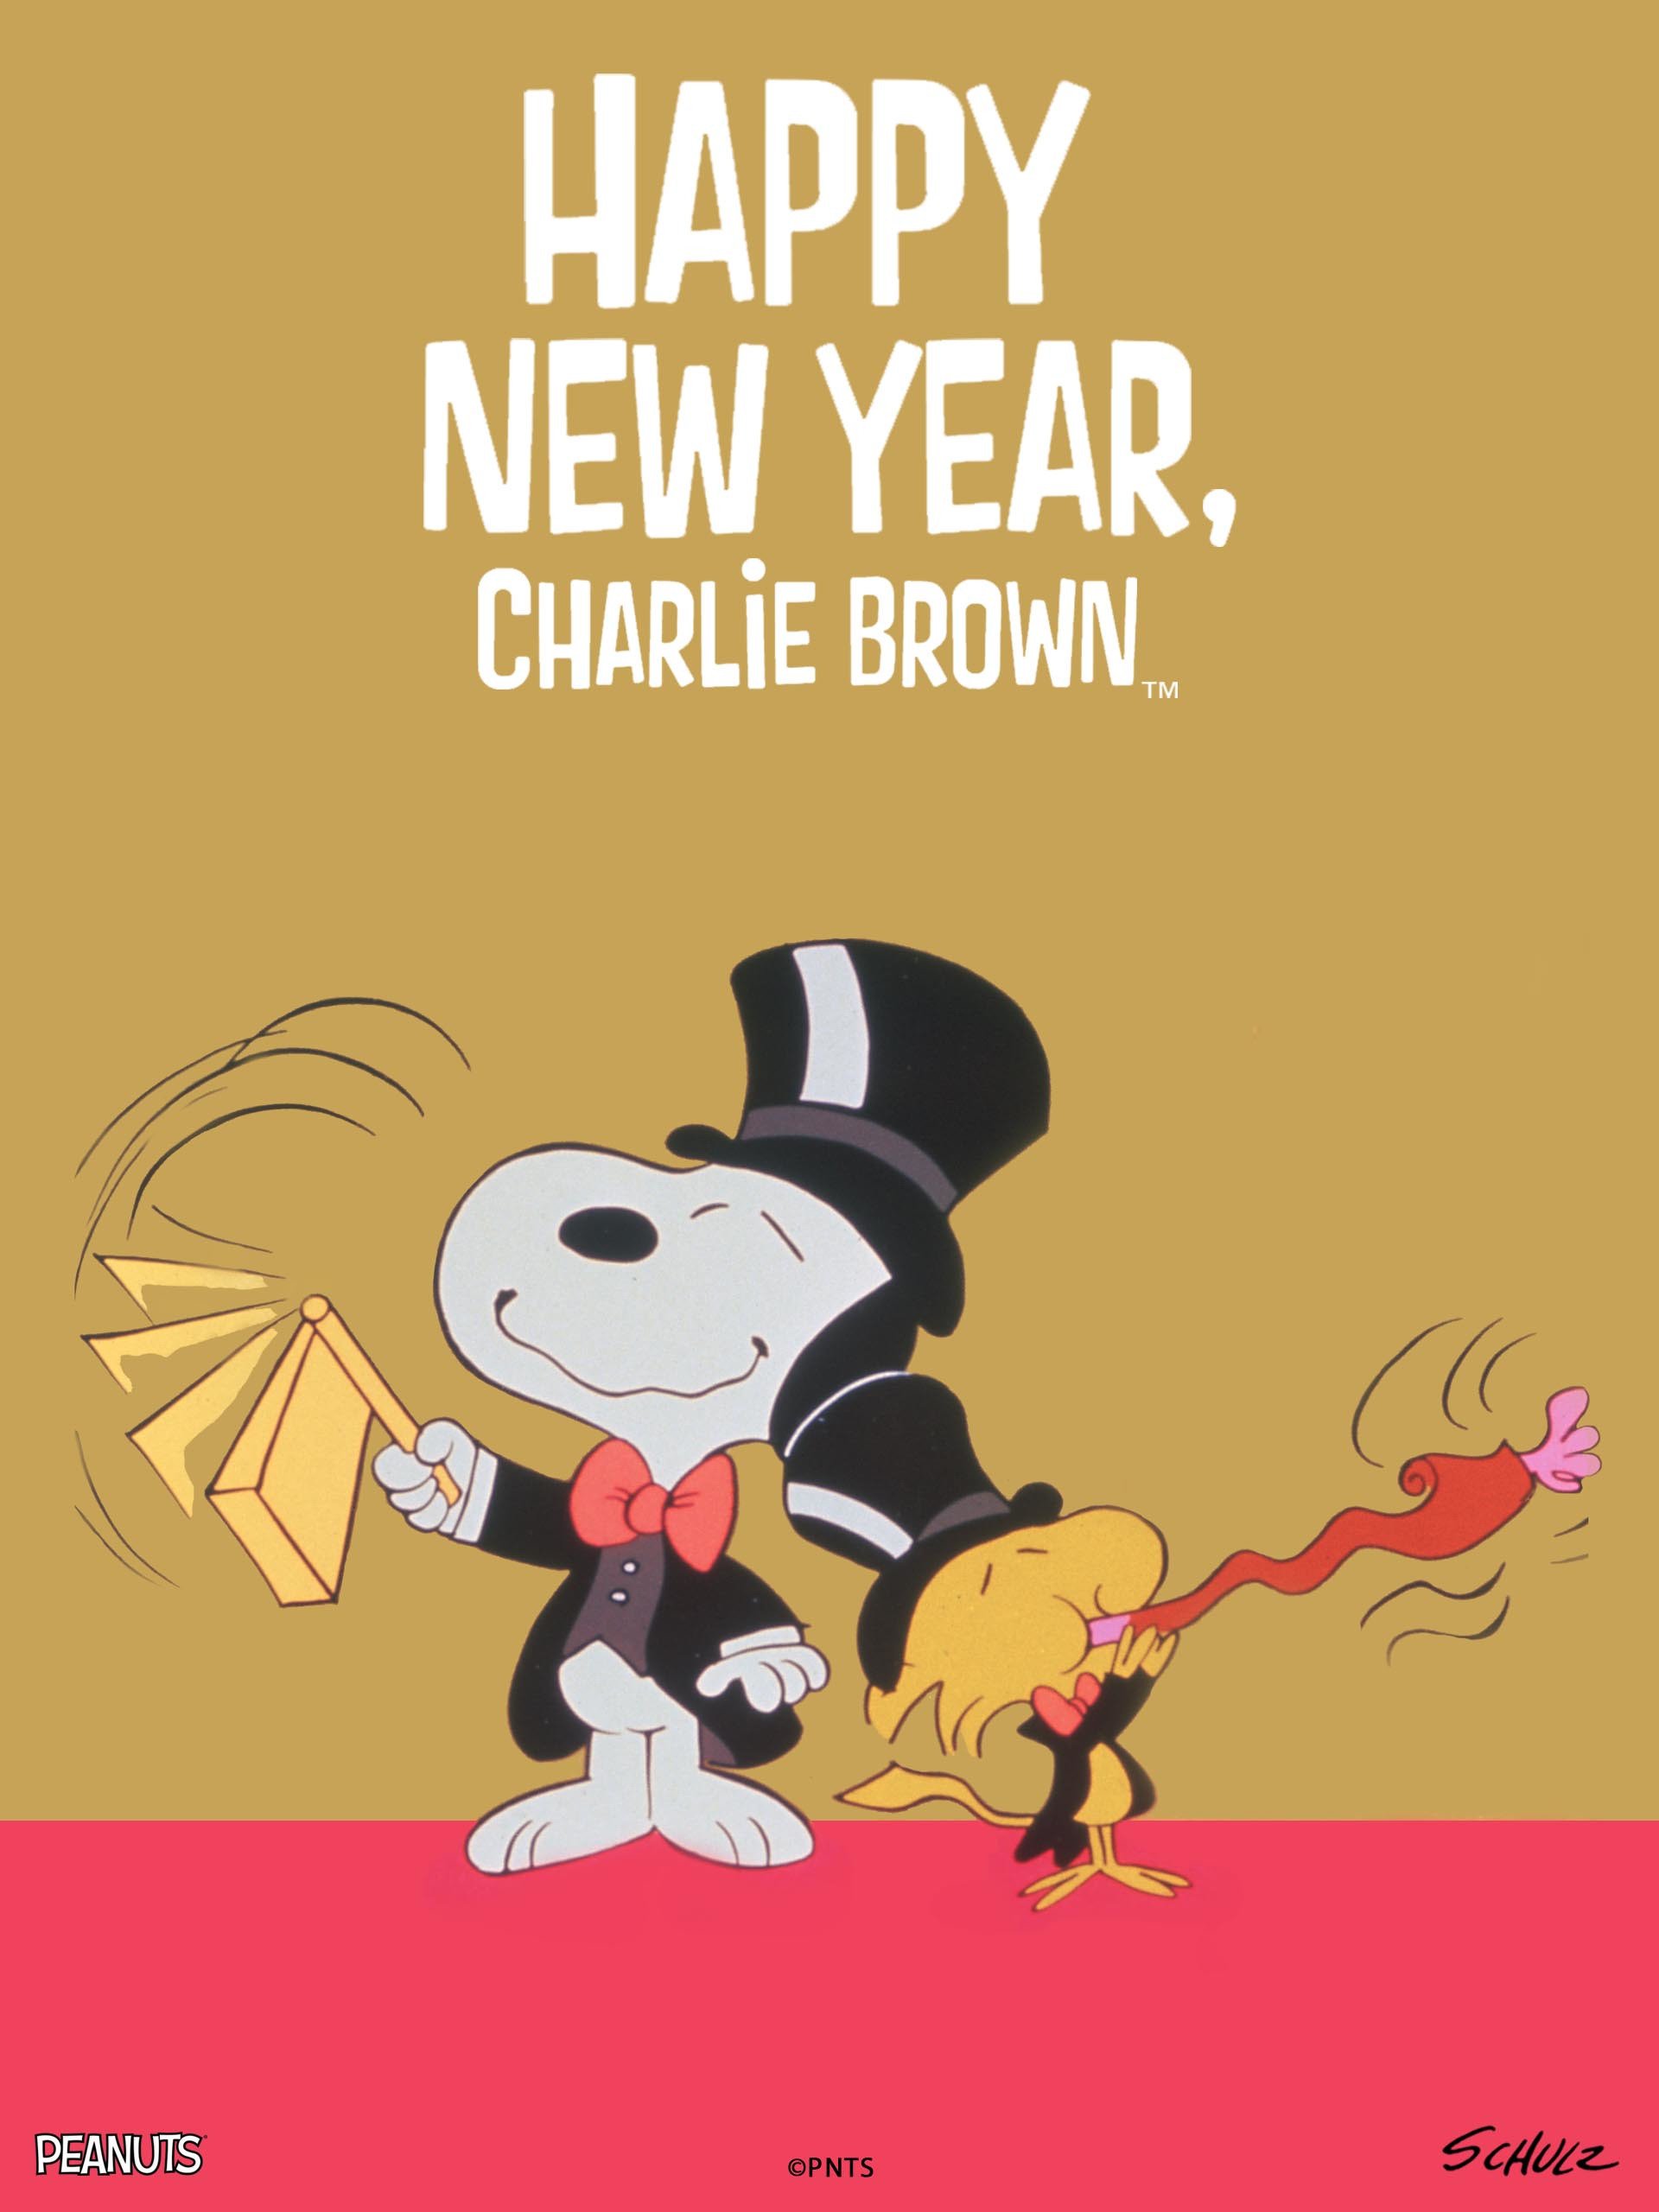 Happy New Year, Charlie Brown poster art.